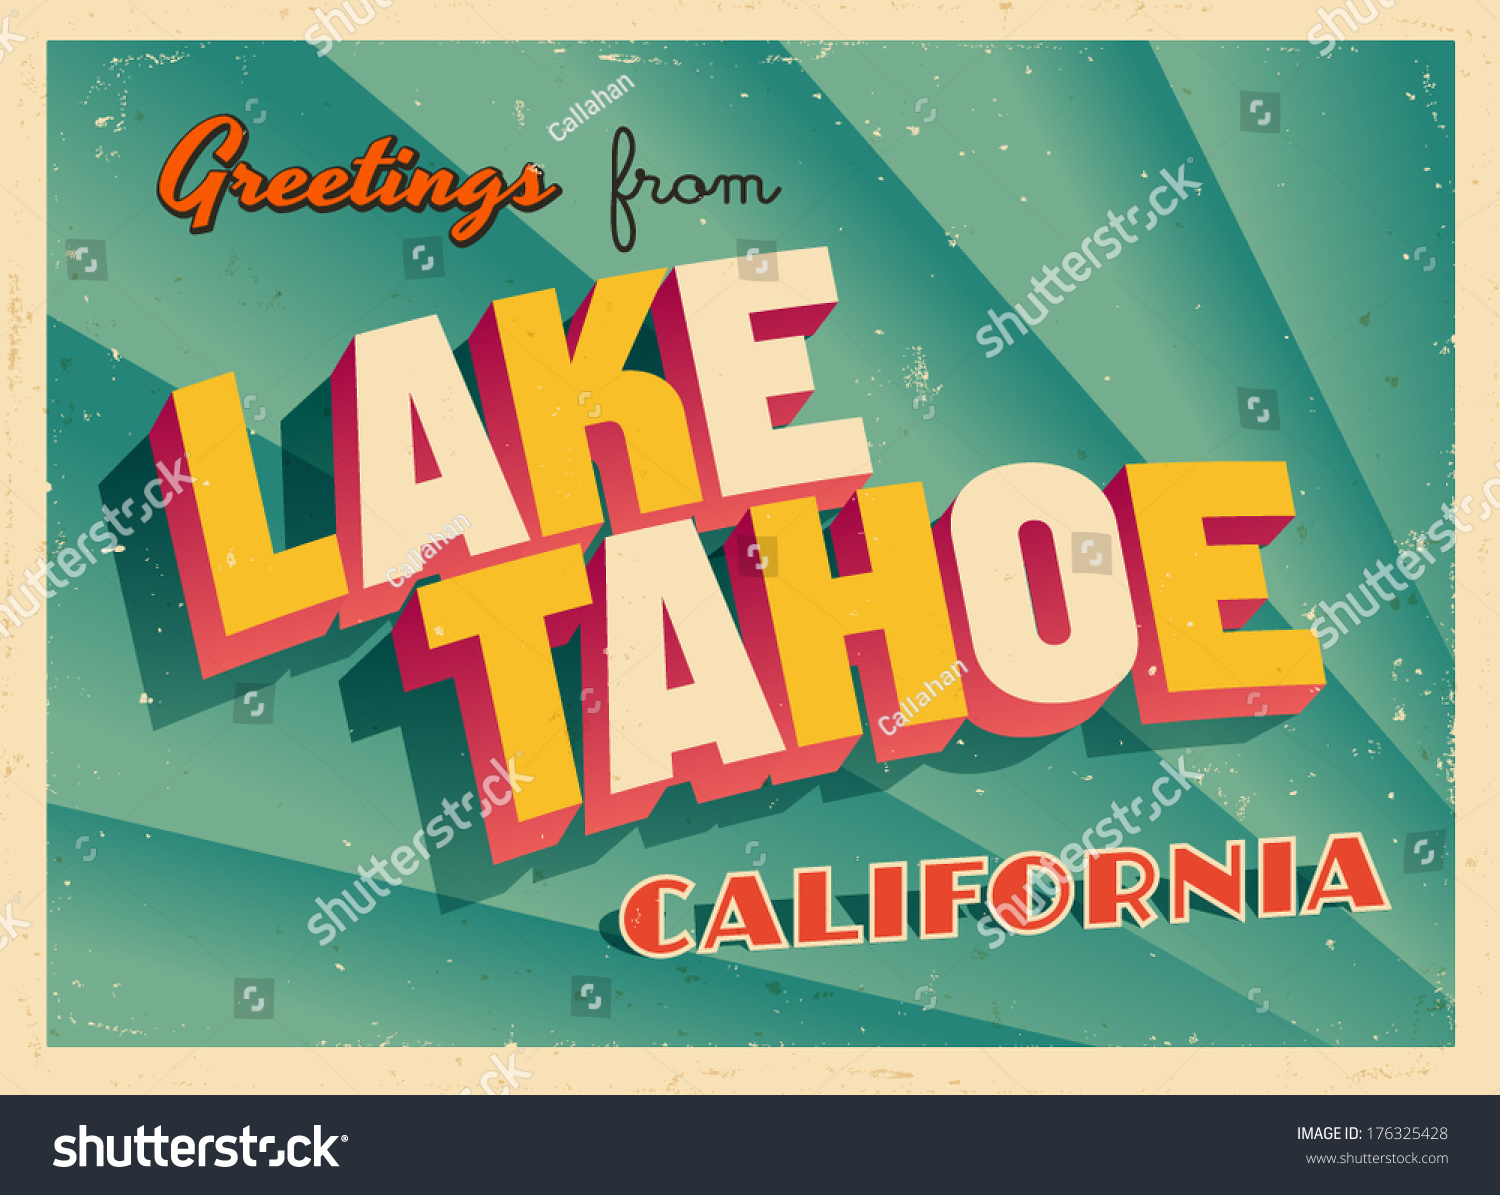 SVG of Vintage Touristic Greeting Card - Lake Tahoe, California - Vector EPS10. Grunge effects can be easily removed for a brand new, clean sign. svg